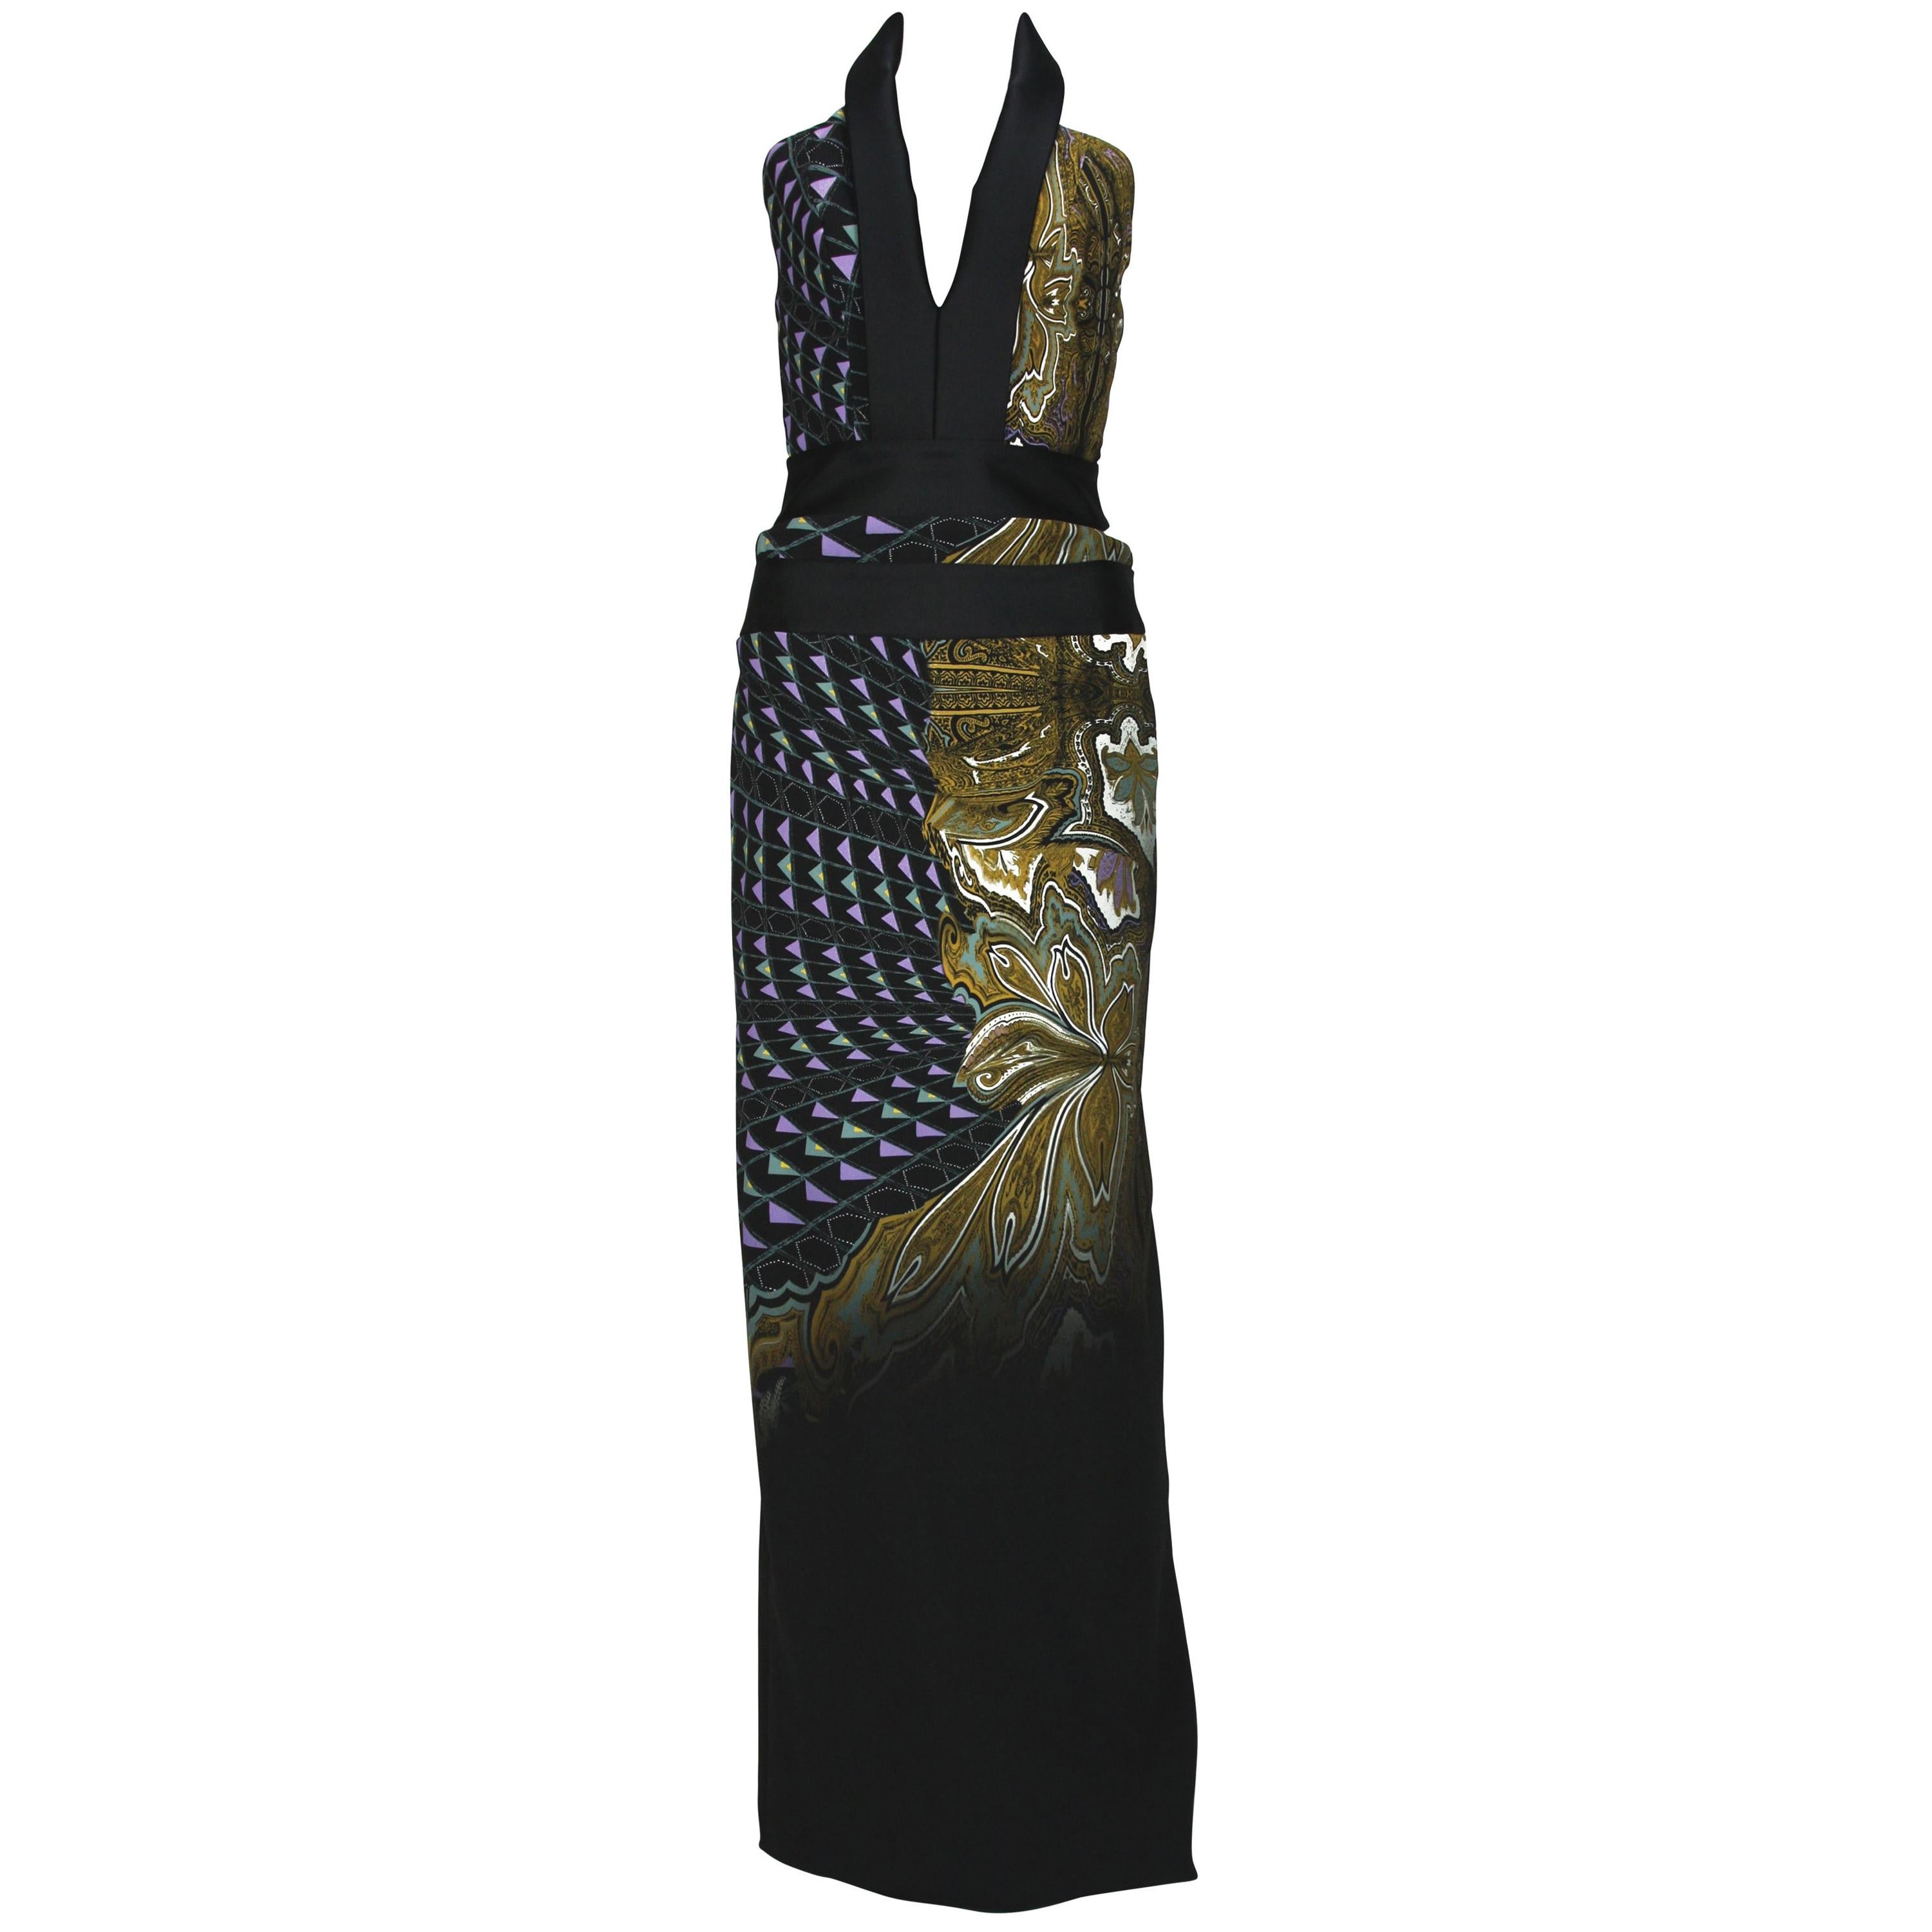 ETRO Runway Printed Side Cutout Open Back Halter Style Dress Gown It 42 - US 6